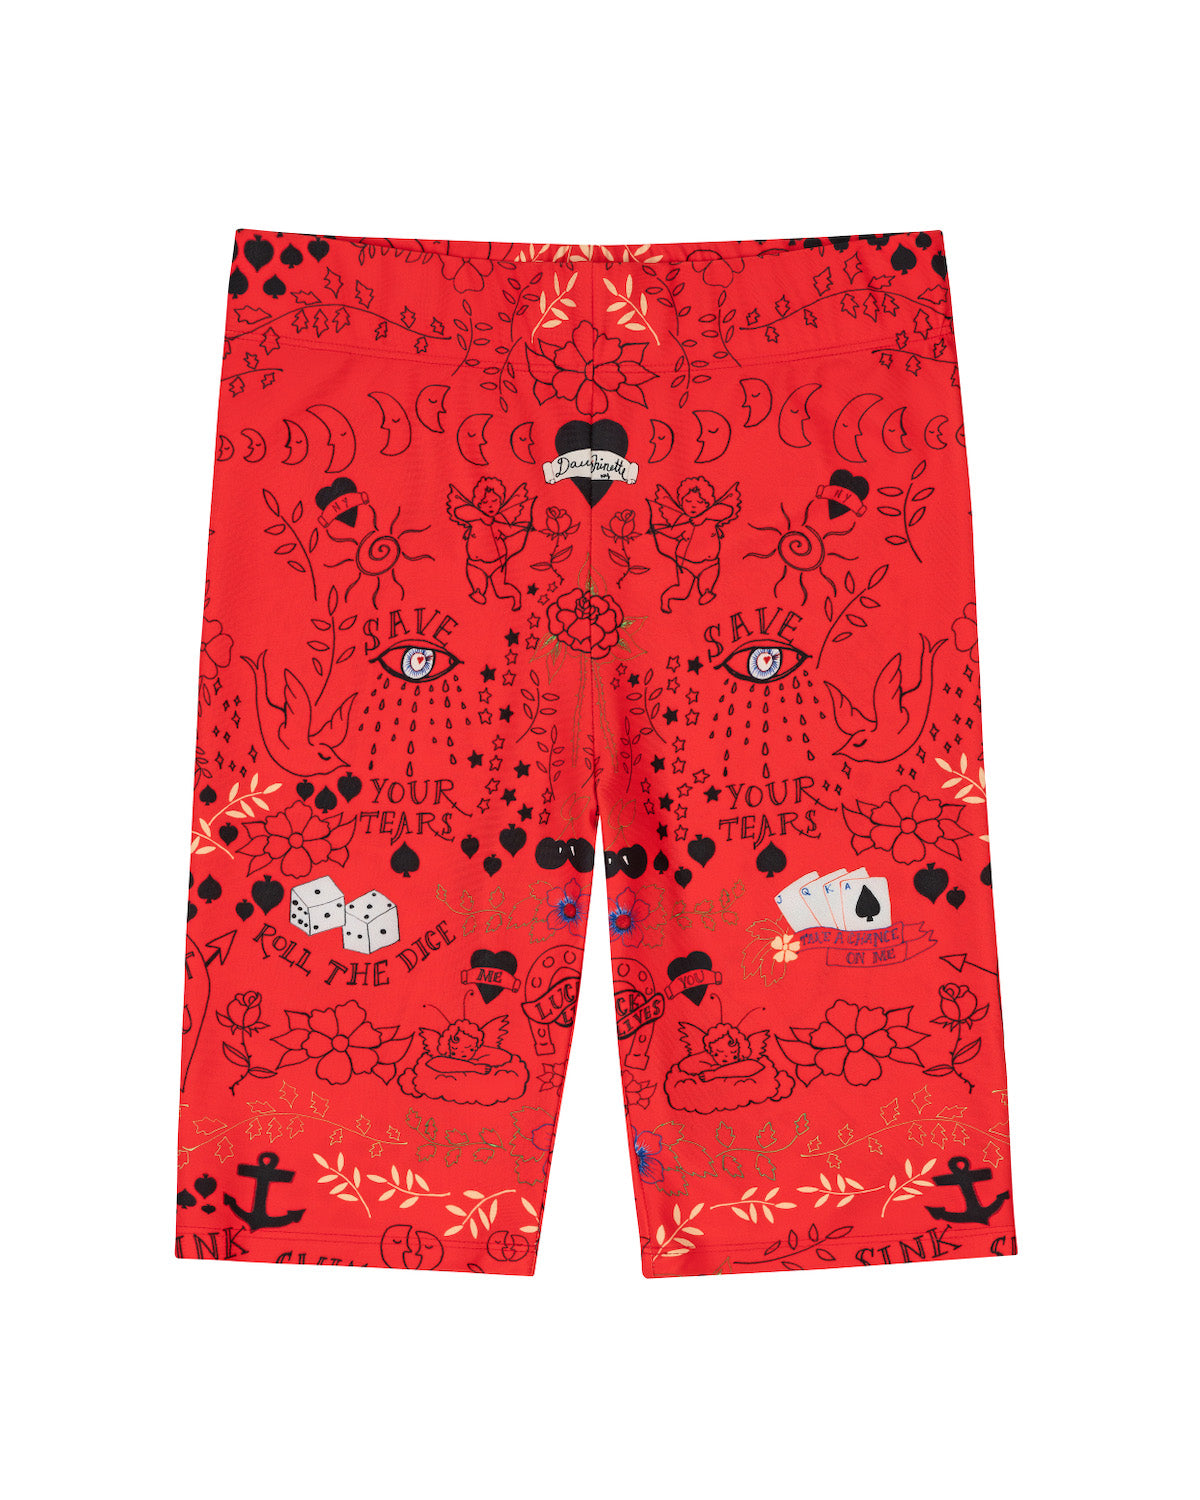 A lil bike short in our Red Flame Tattoo You print, hand-illustrated by designer Olivia Cheng.